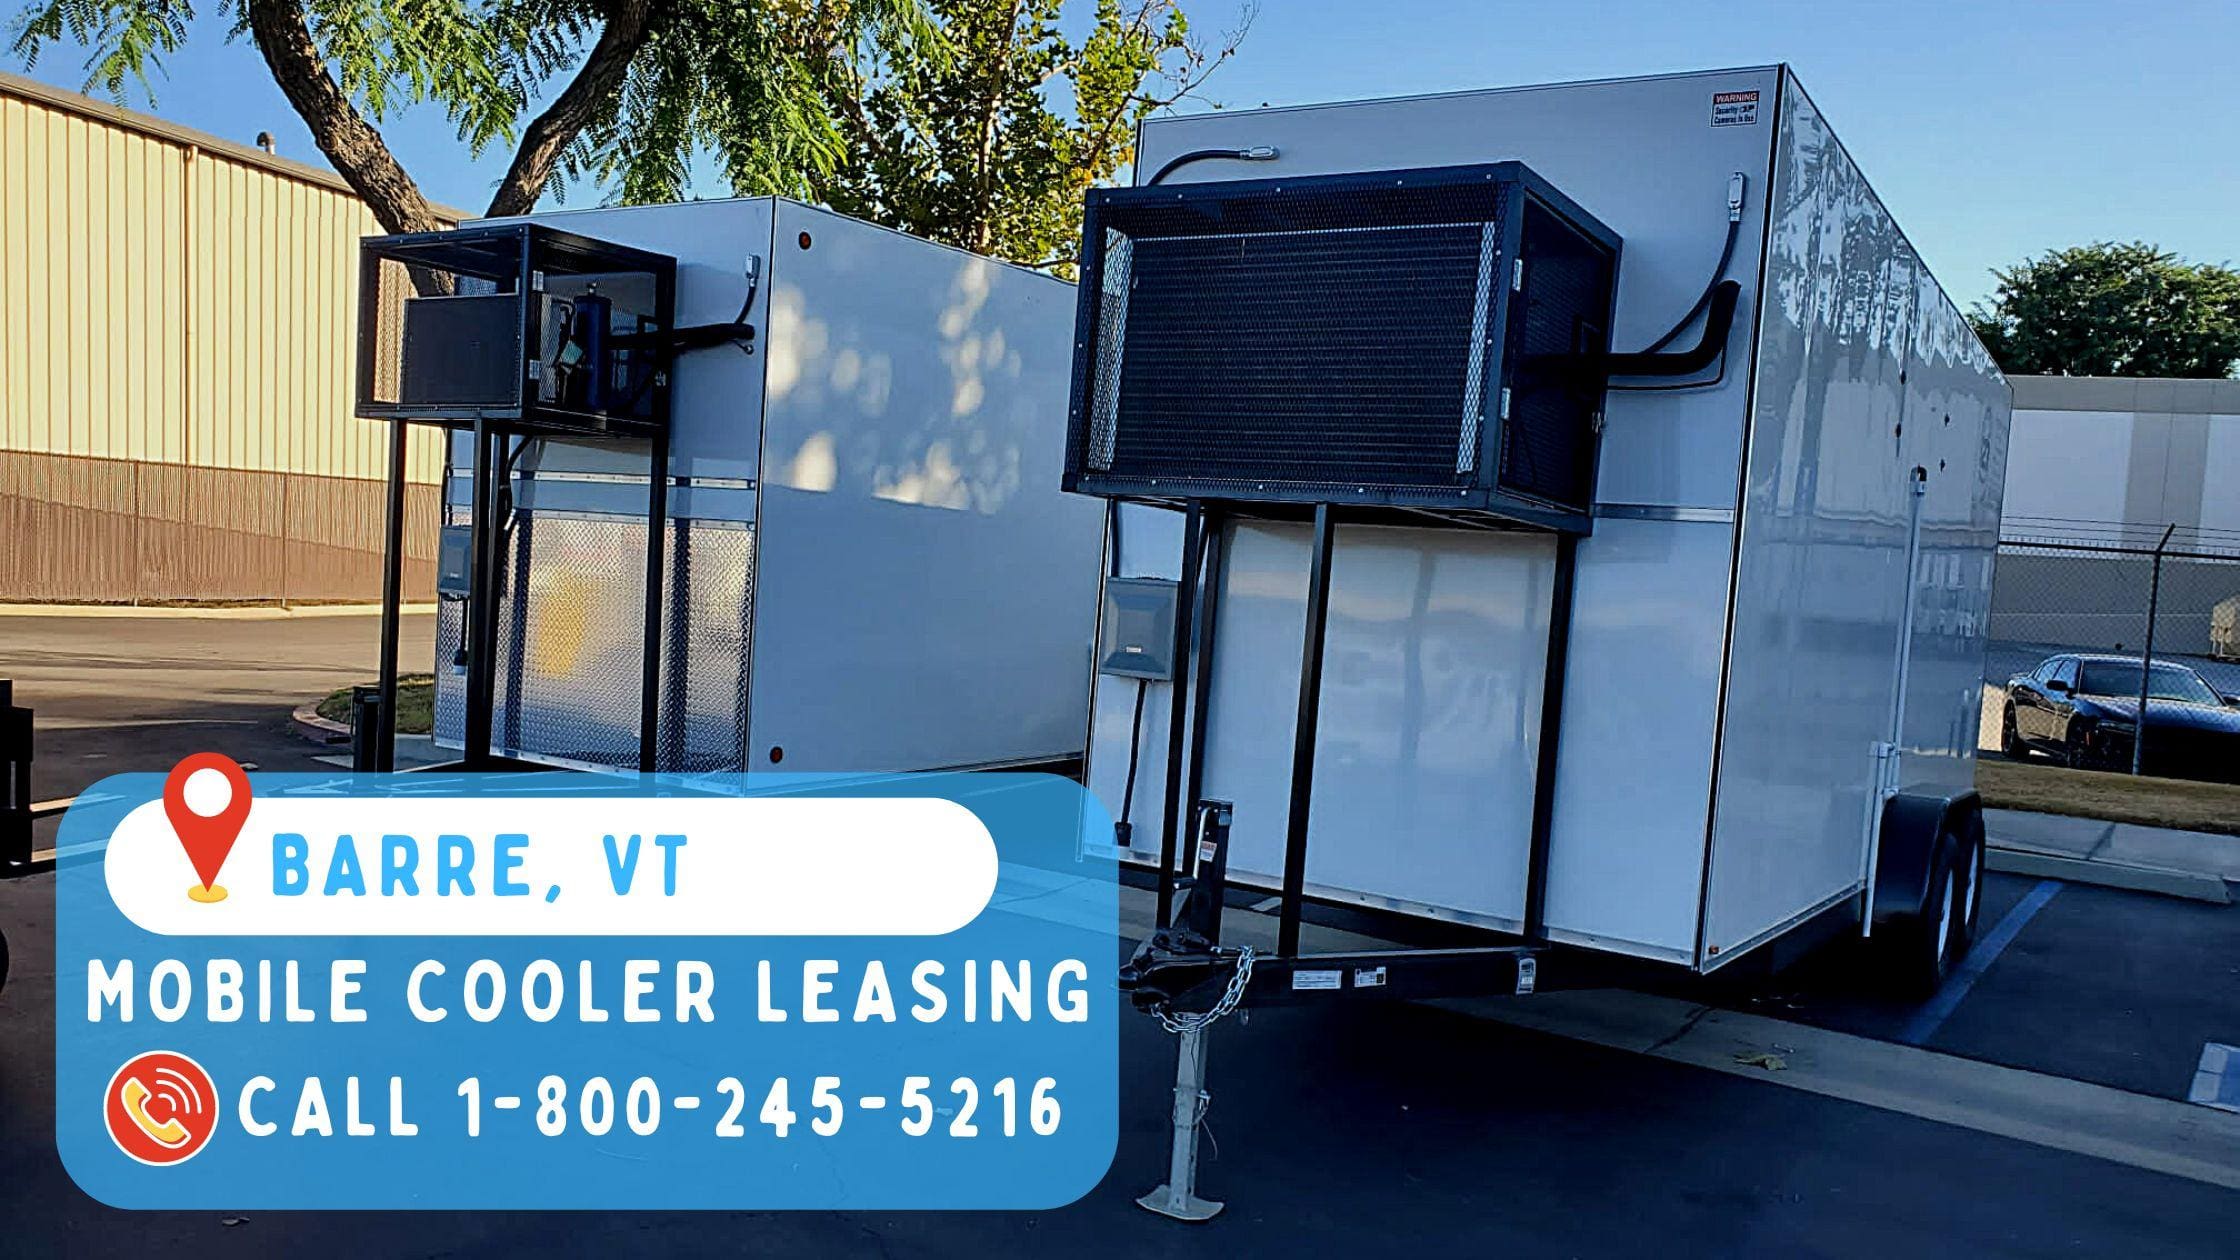 Mobile Cooler Leasing in Barre